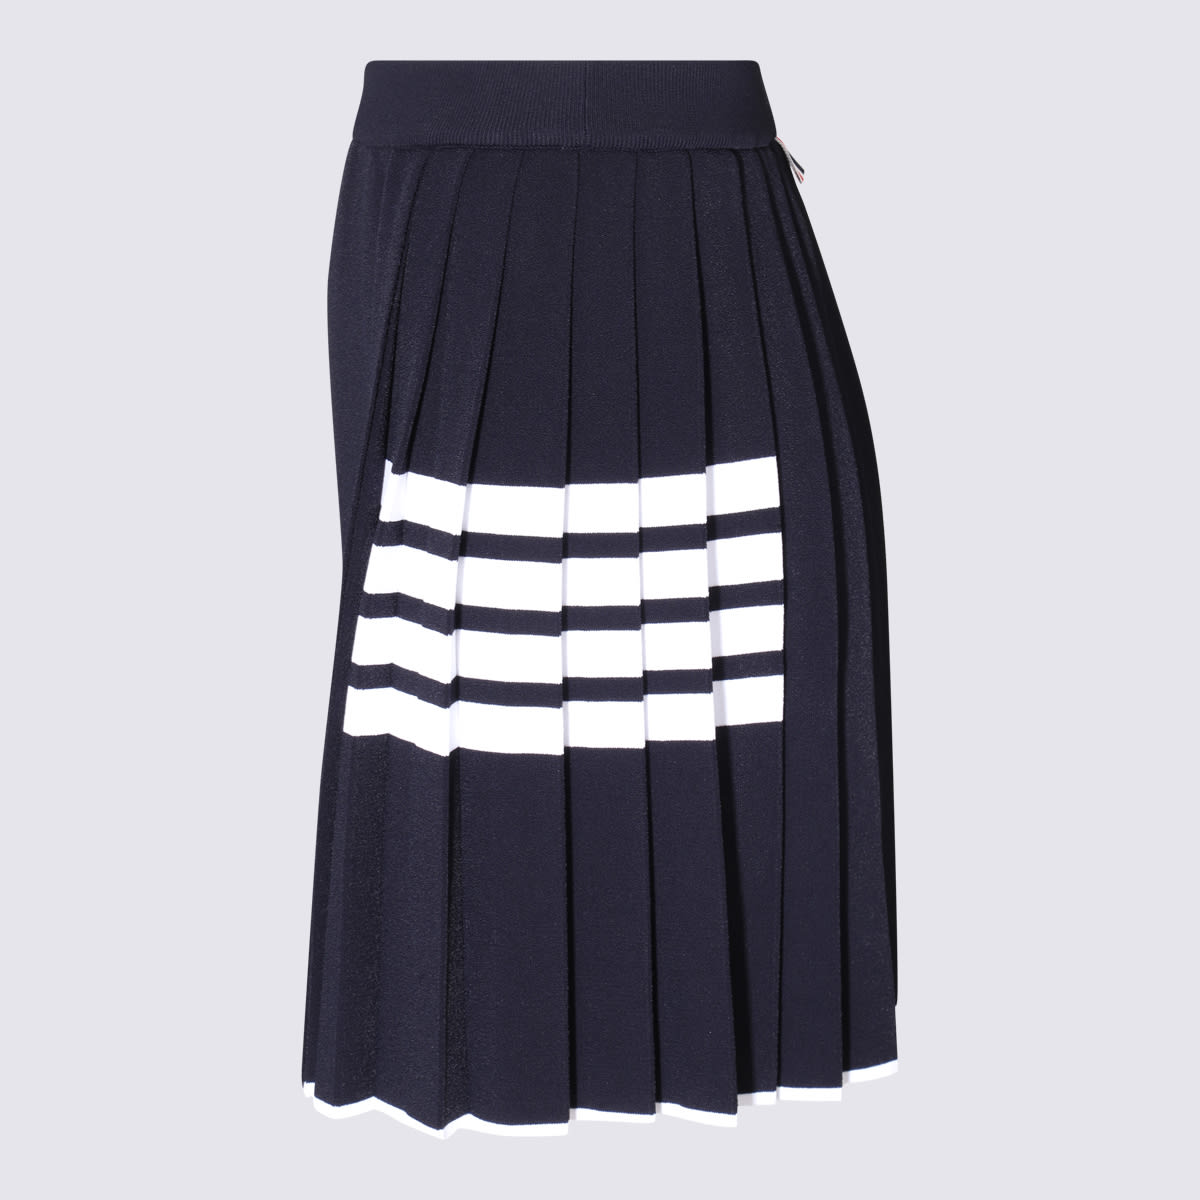 THOM BROWNE NAVY BLUE AND WHITE VISCOSE BLEND SKIRT